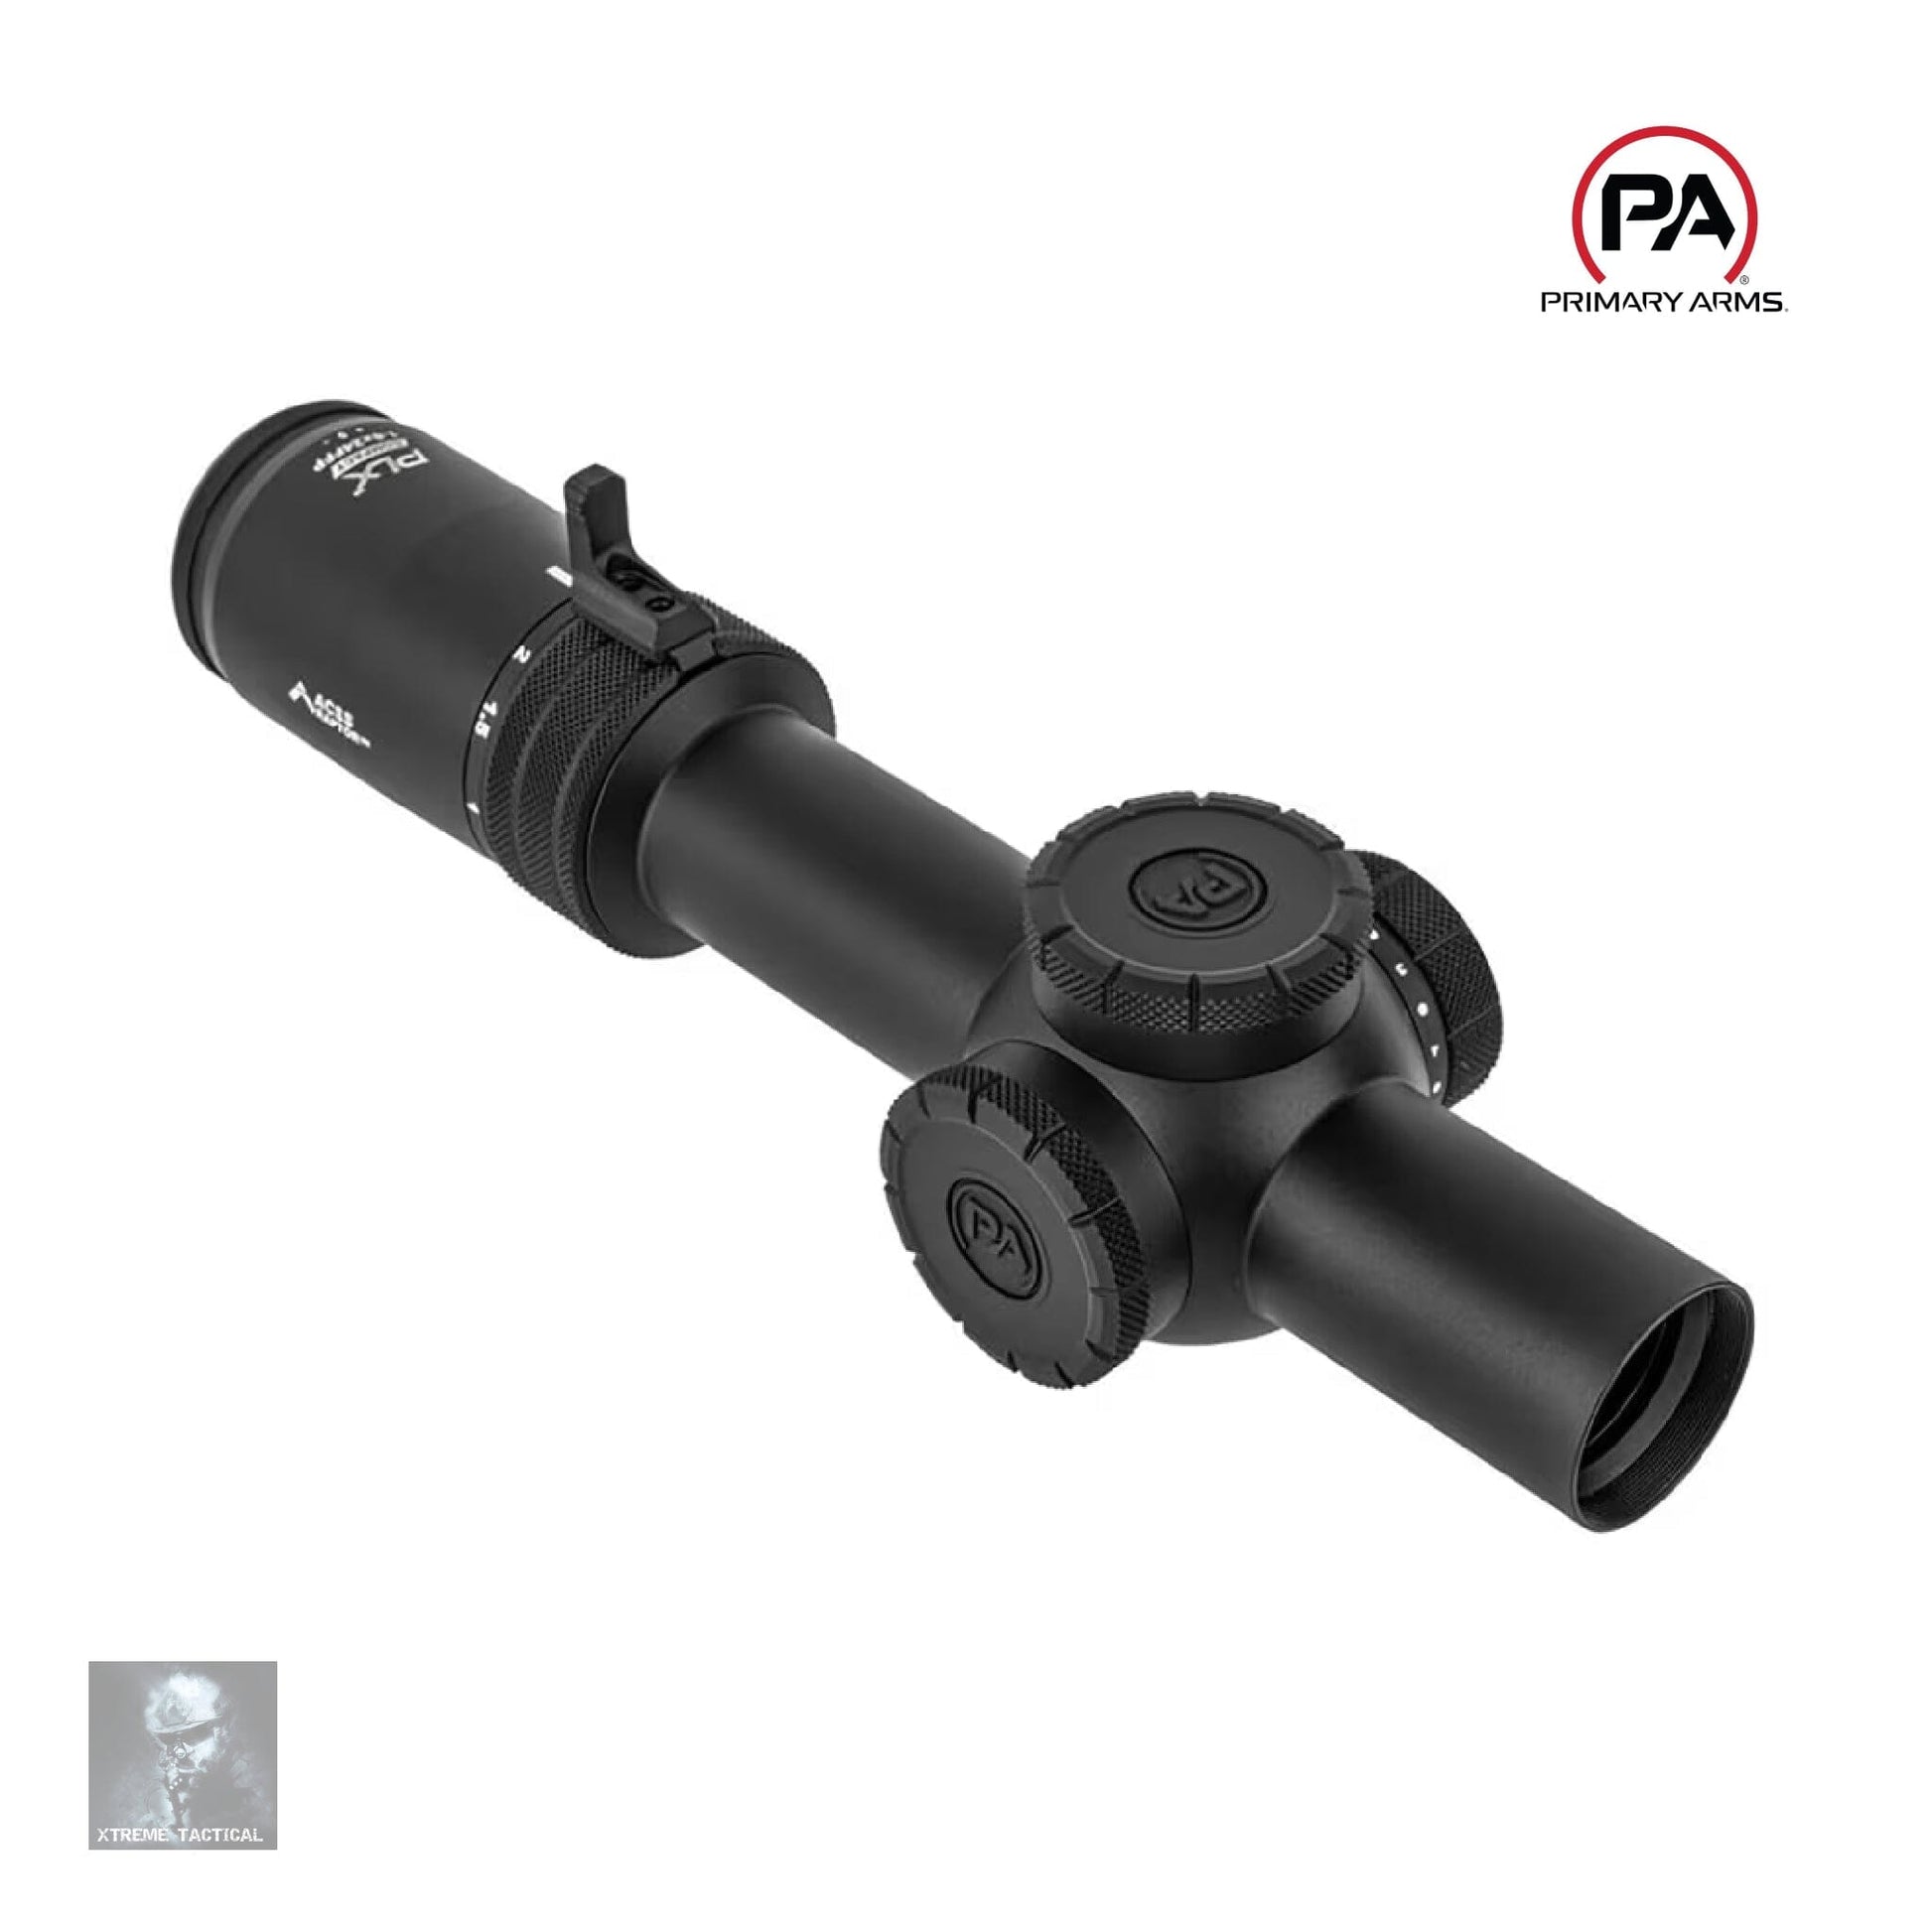 Primary Arms Compact PLxC 1-8x24 FFP Rifle Scope - ACSS Raptor M8 Yard 5.56/.308 Reticle LPVO Rifle Scope Primary Arms 